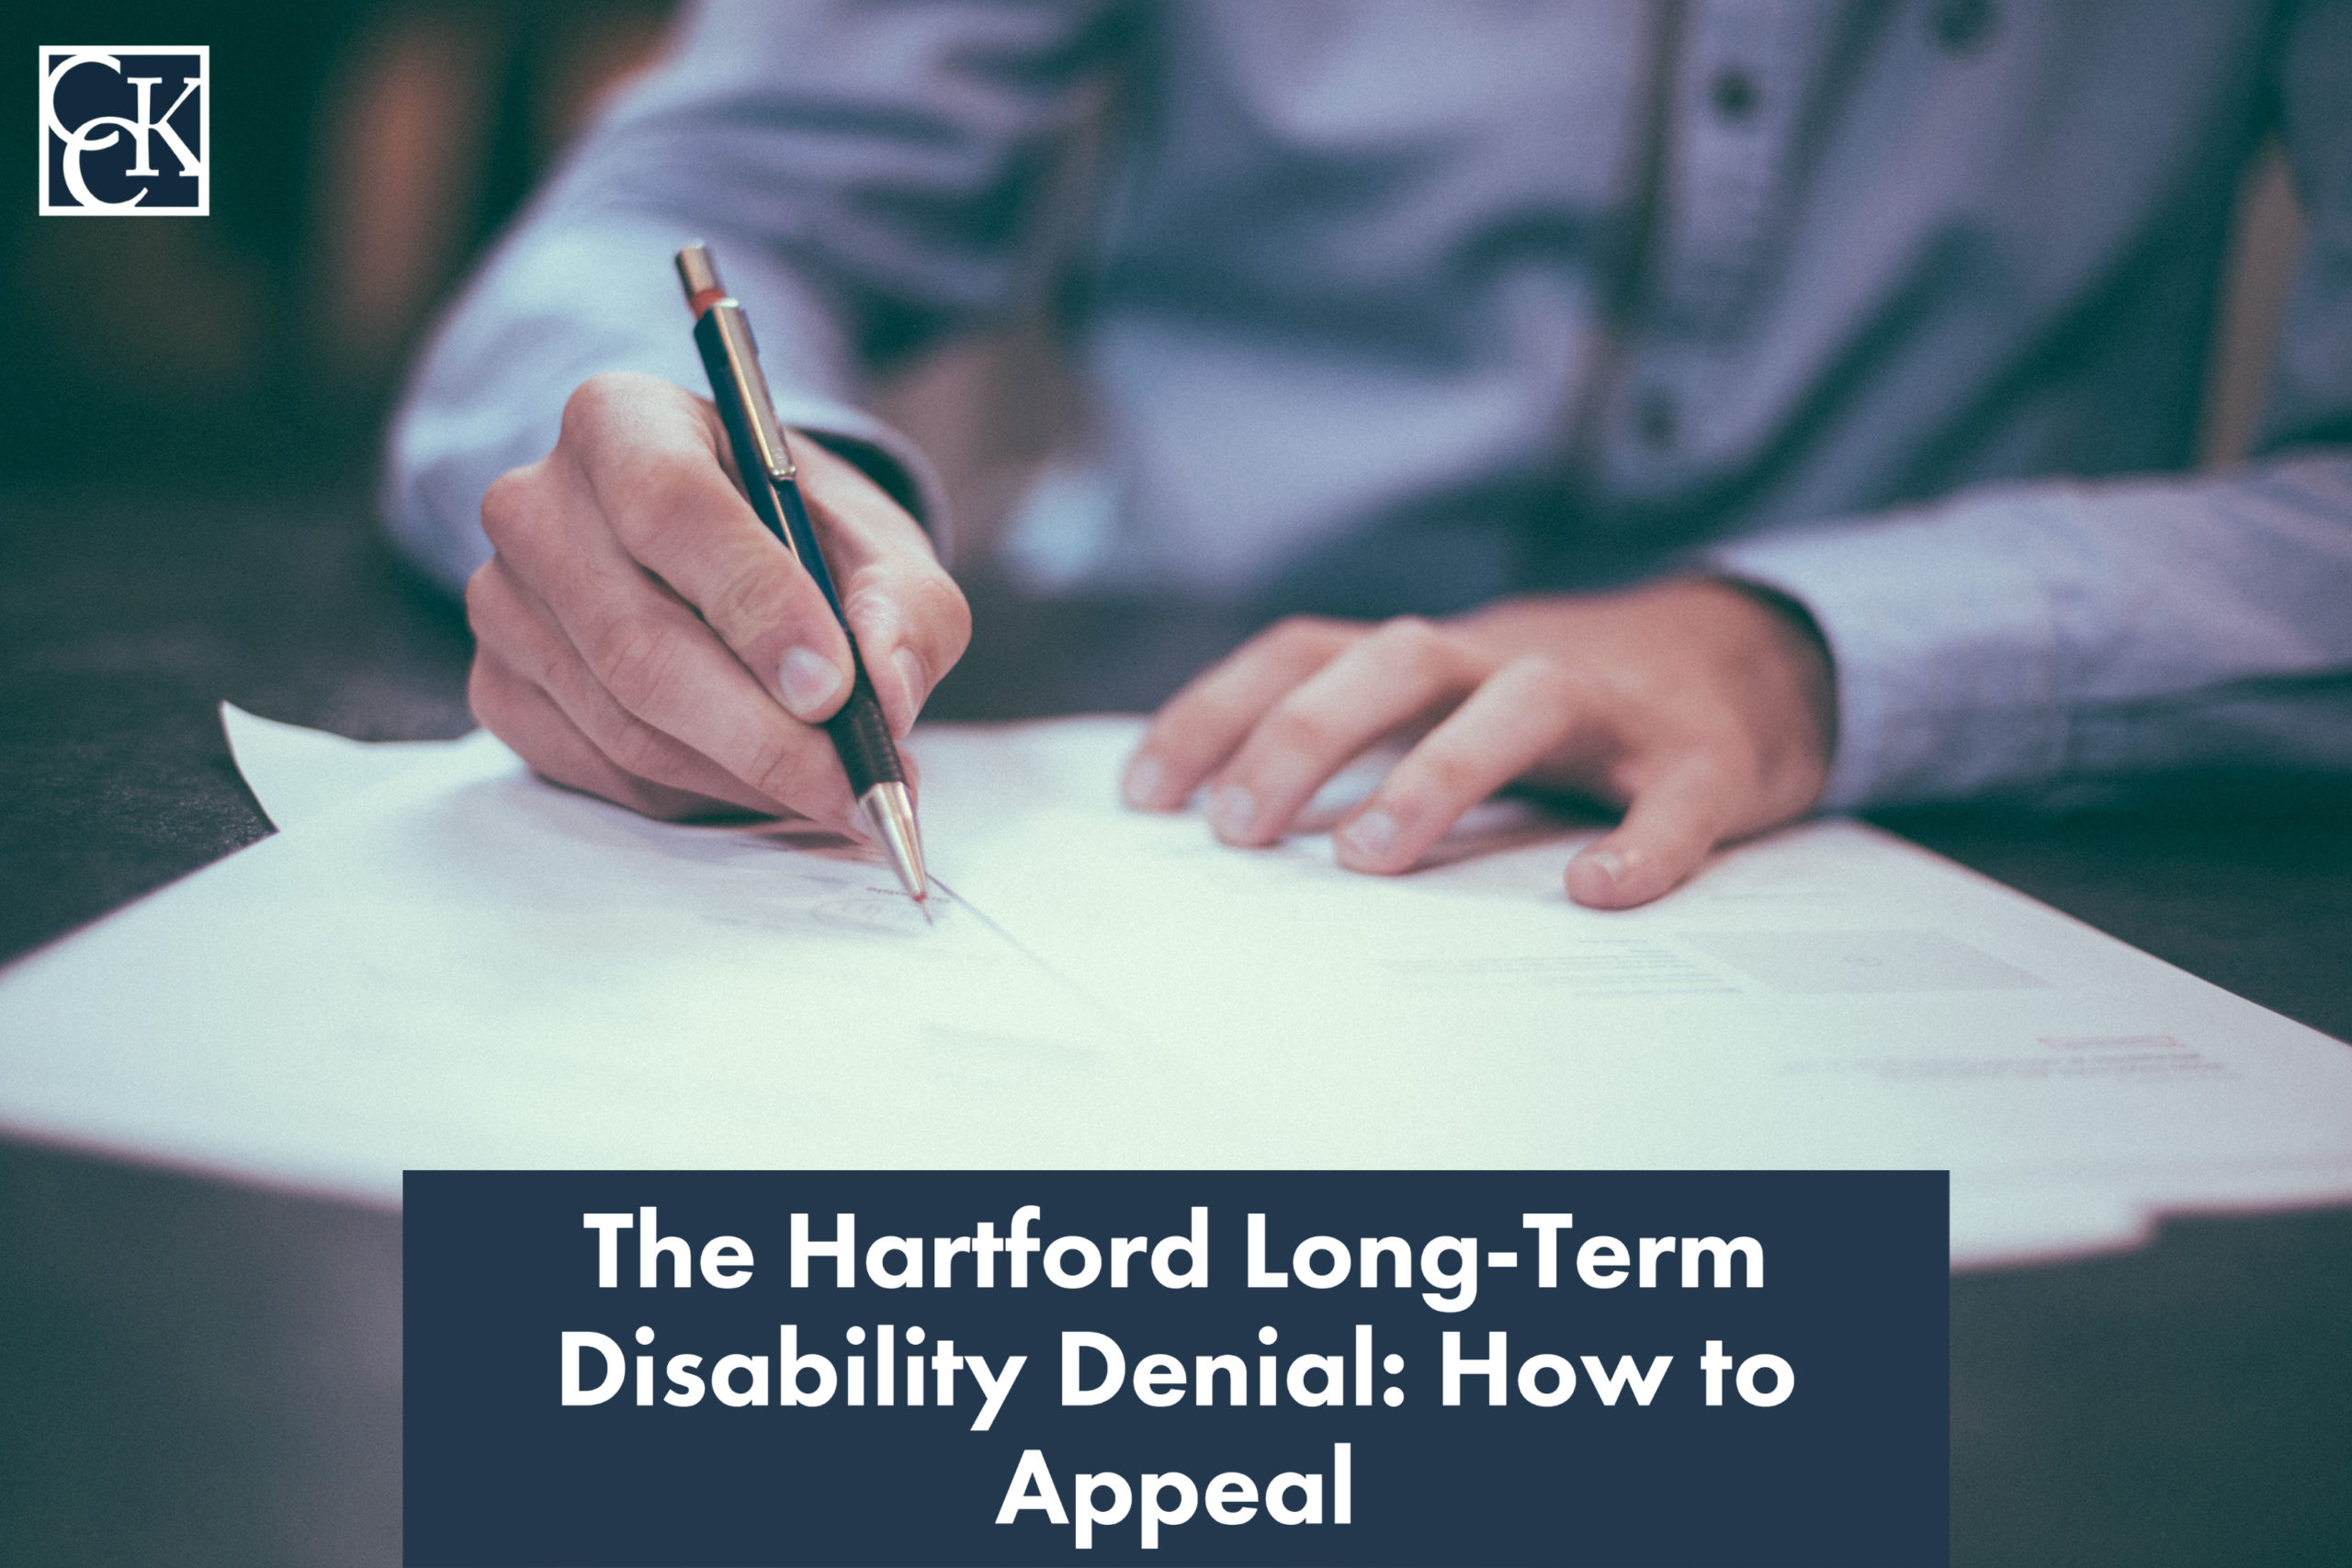 The Hartford Long-Term Disability Denial: How to Appeal  CCK Law